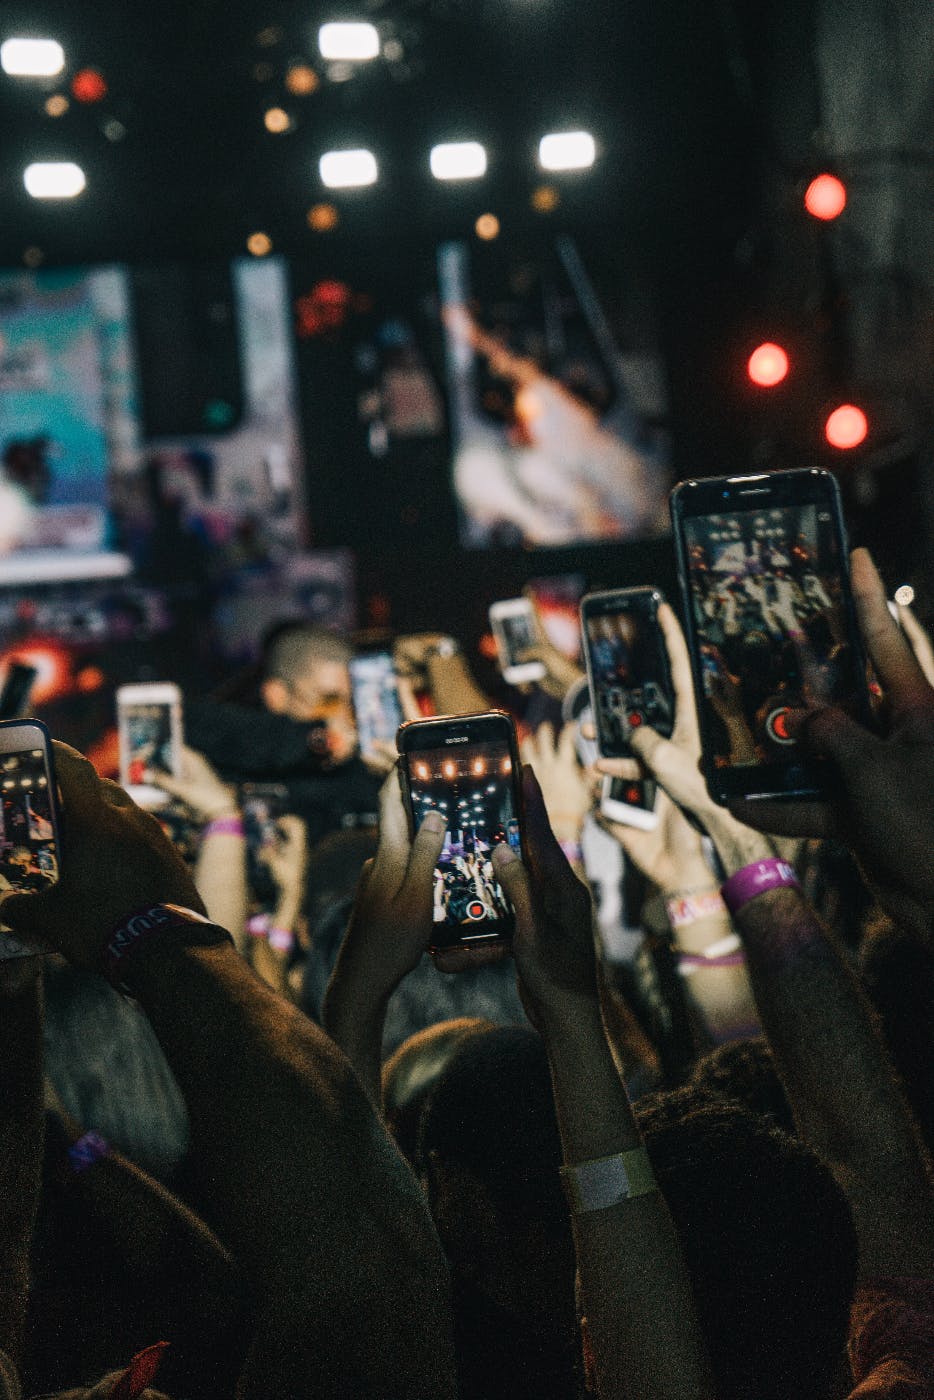 Hundreds of people raising their smartphones up to take a picture